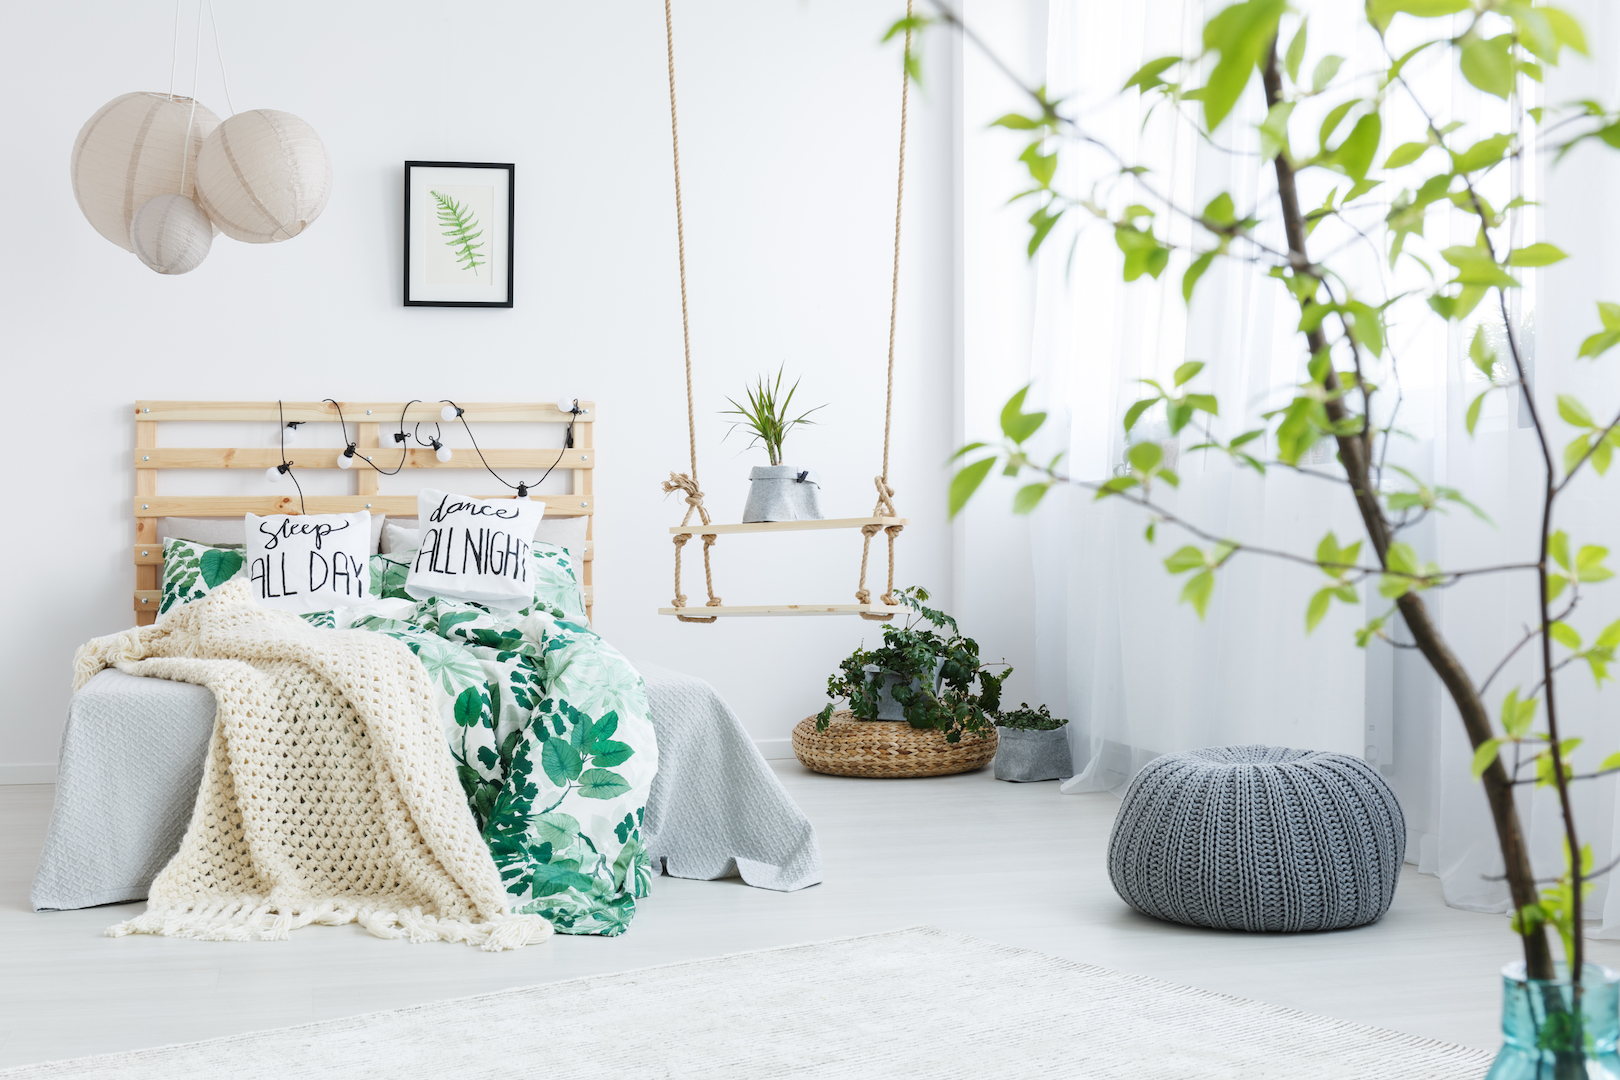 Bedroom with gray pouf, plants, double bed, lamp and swing